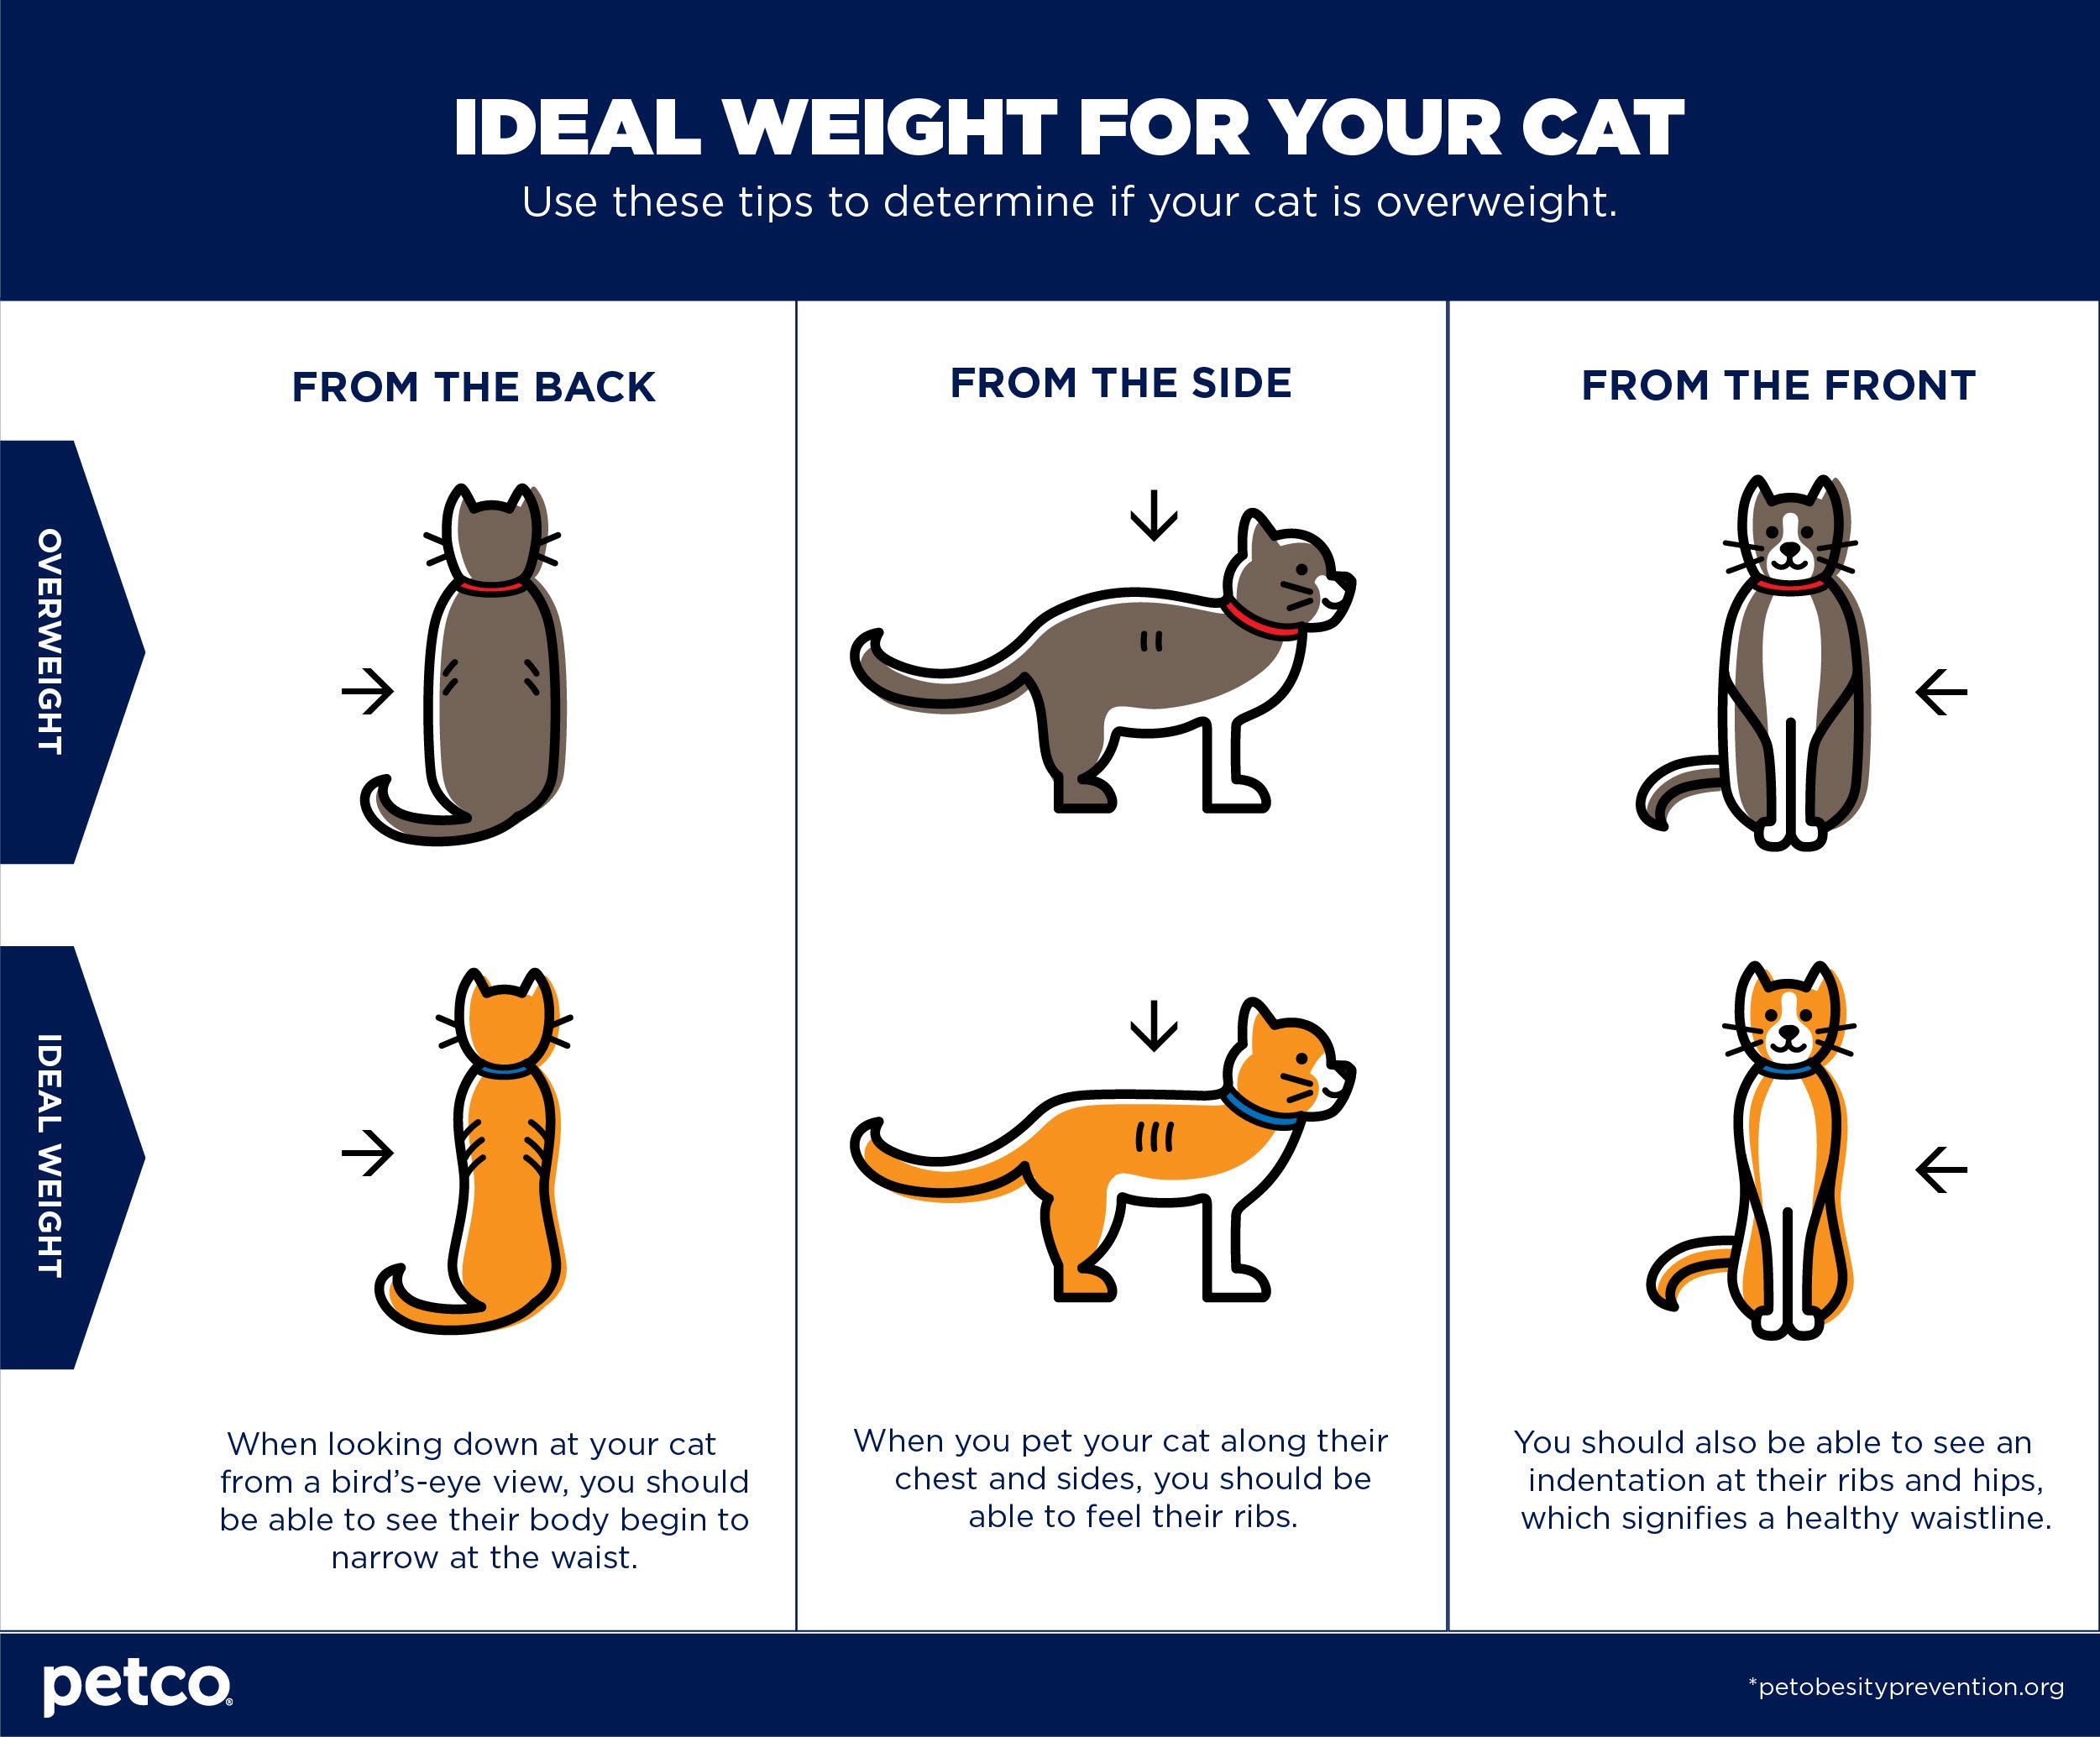 Is my Cat Overweight?